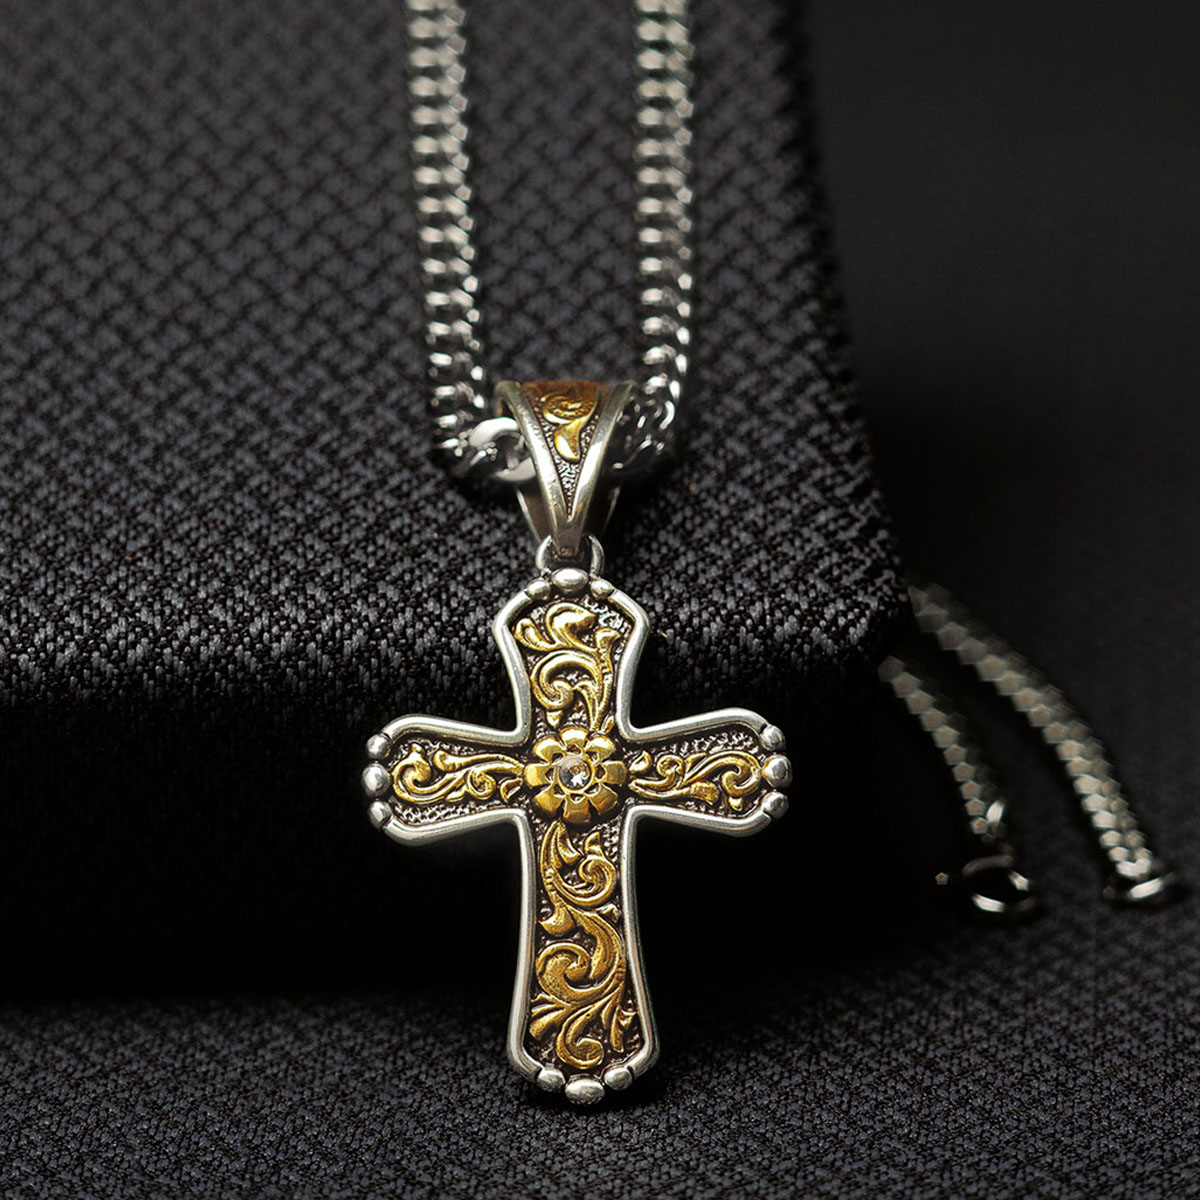 32120 Mens Floral Scrolled Cross Chain Necklace, Gold & Silver - 22 In.